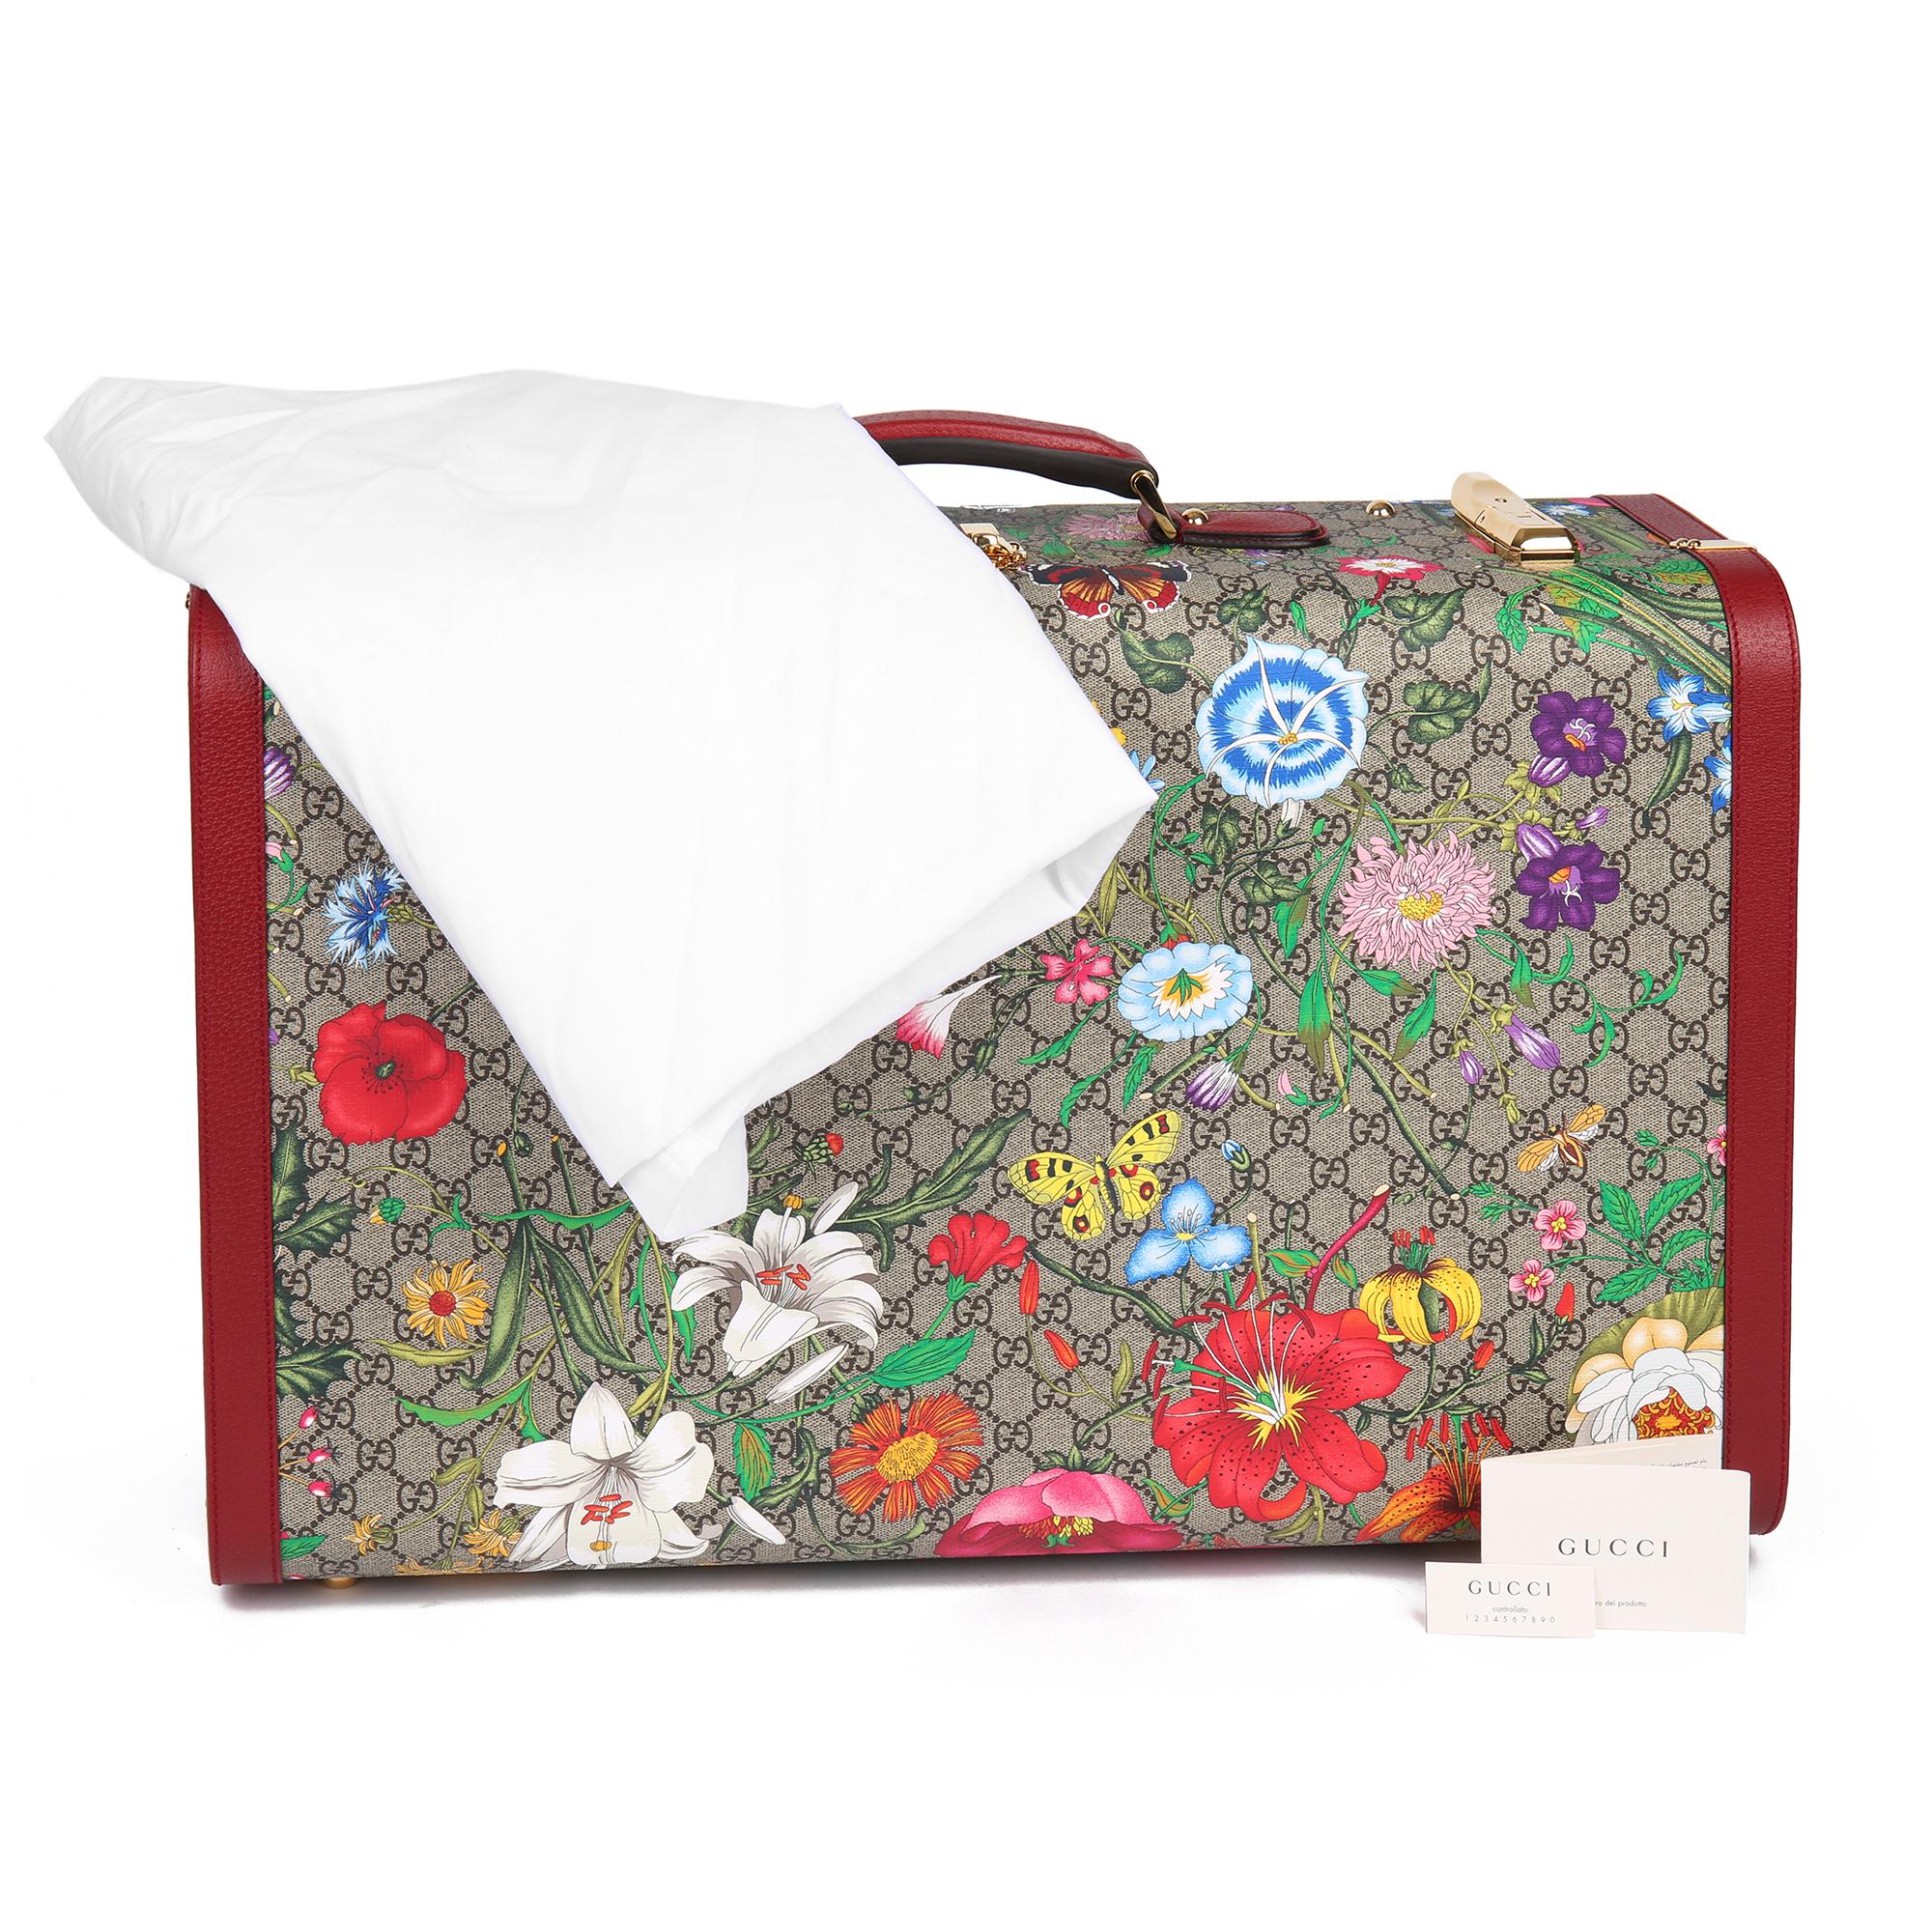 2021 Gucci GG Flora Coated Canvas & Red Pigskin Leather Large Suitcase Trunk   8